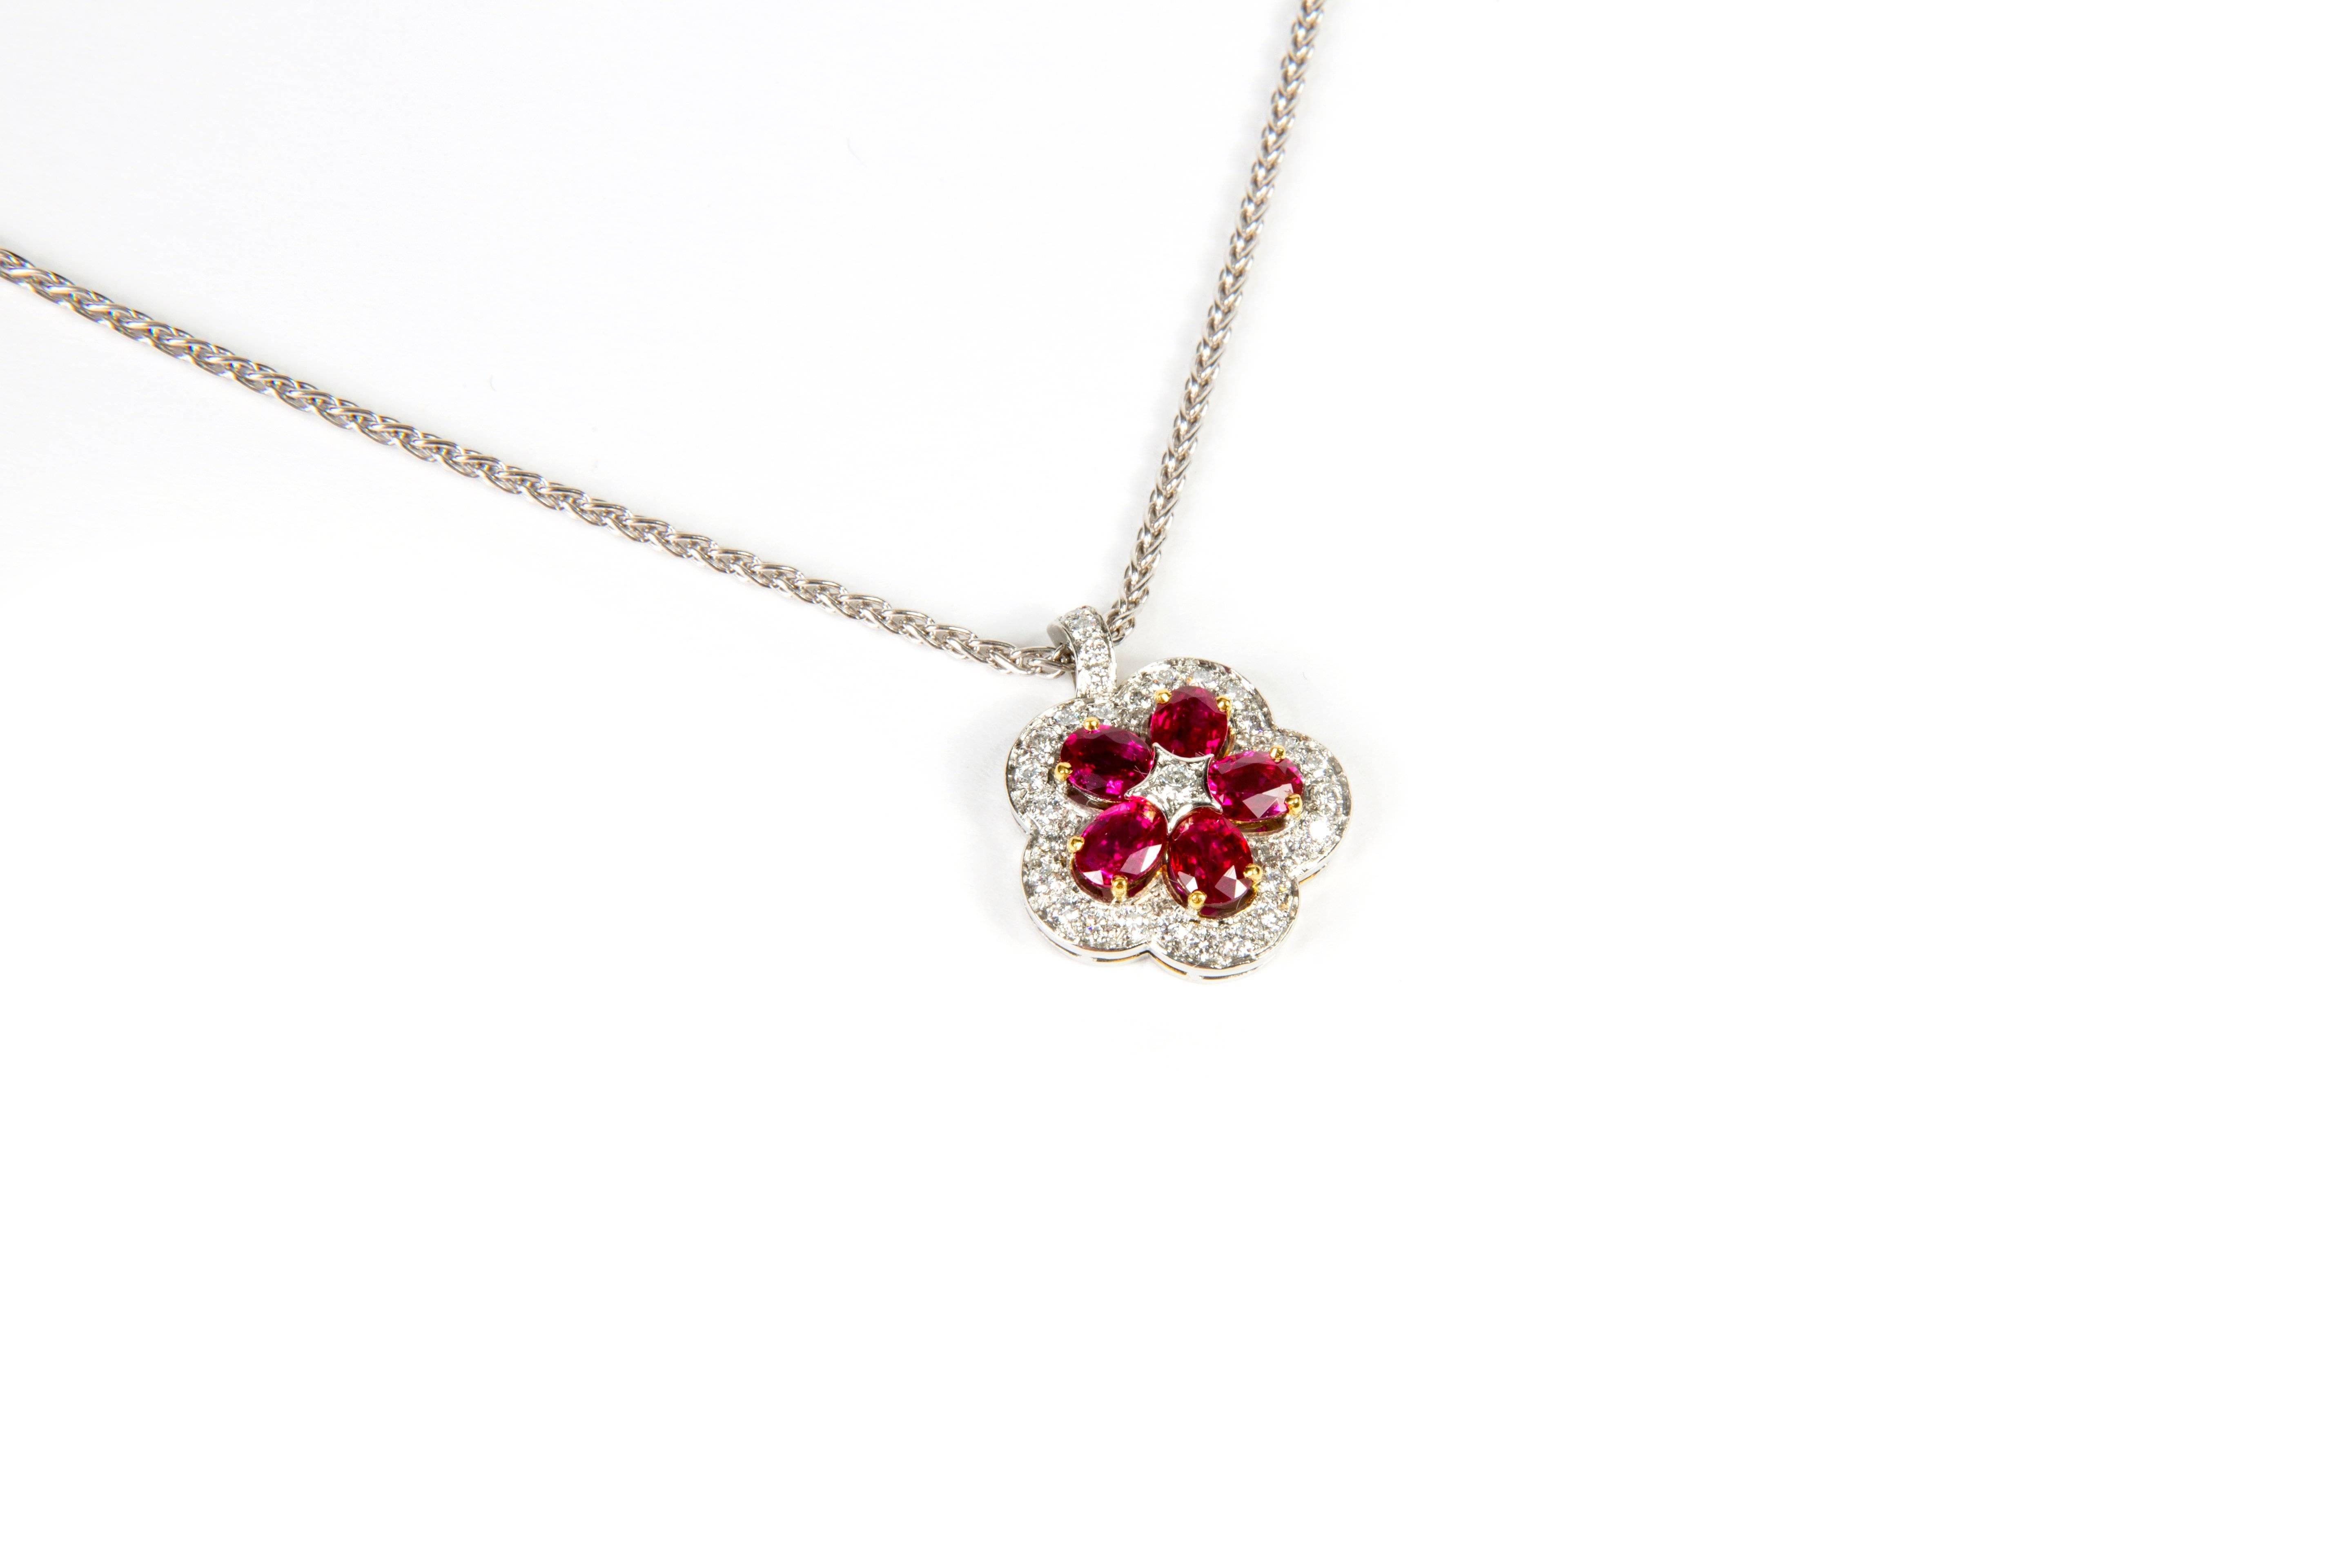 Oval Rubies and Diamonds Pendant 
5 Rubies 1.89cts and Diamonds 0.41cts
18k white gold chain included (42cm long)
